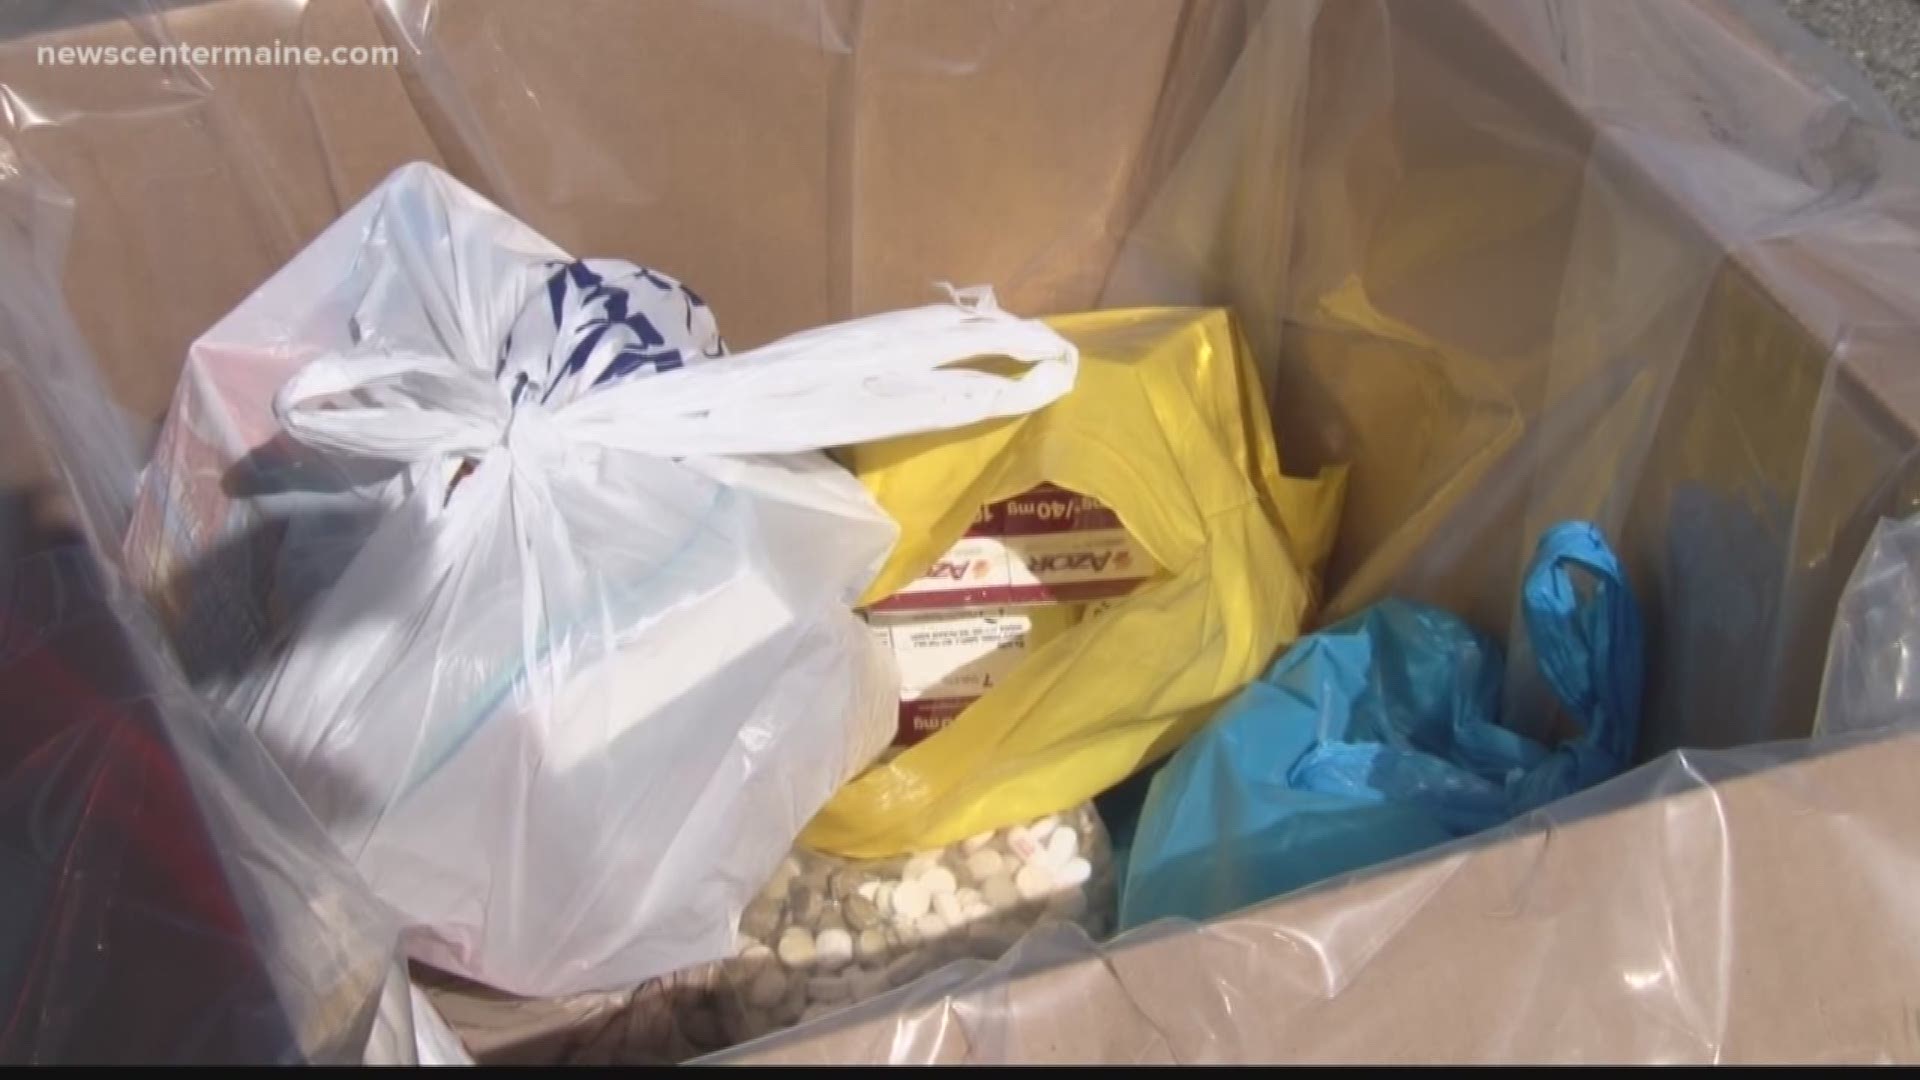 Maine turned in New England's highest amount for Drug Take Back Day